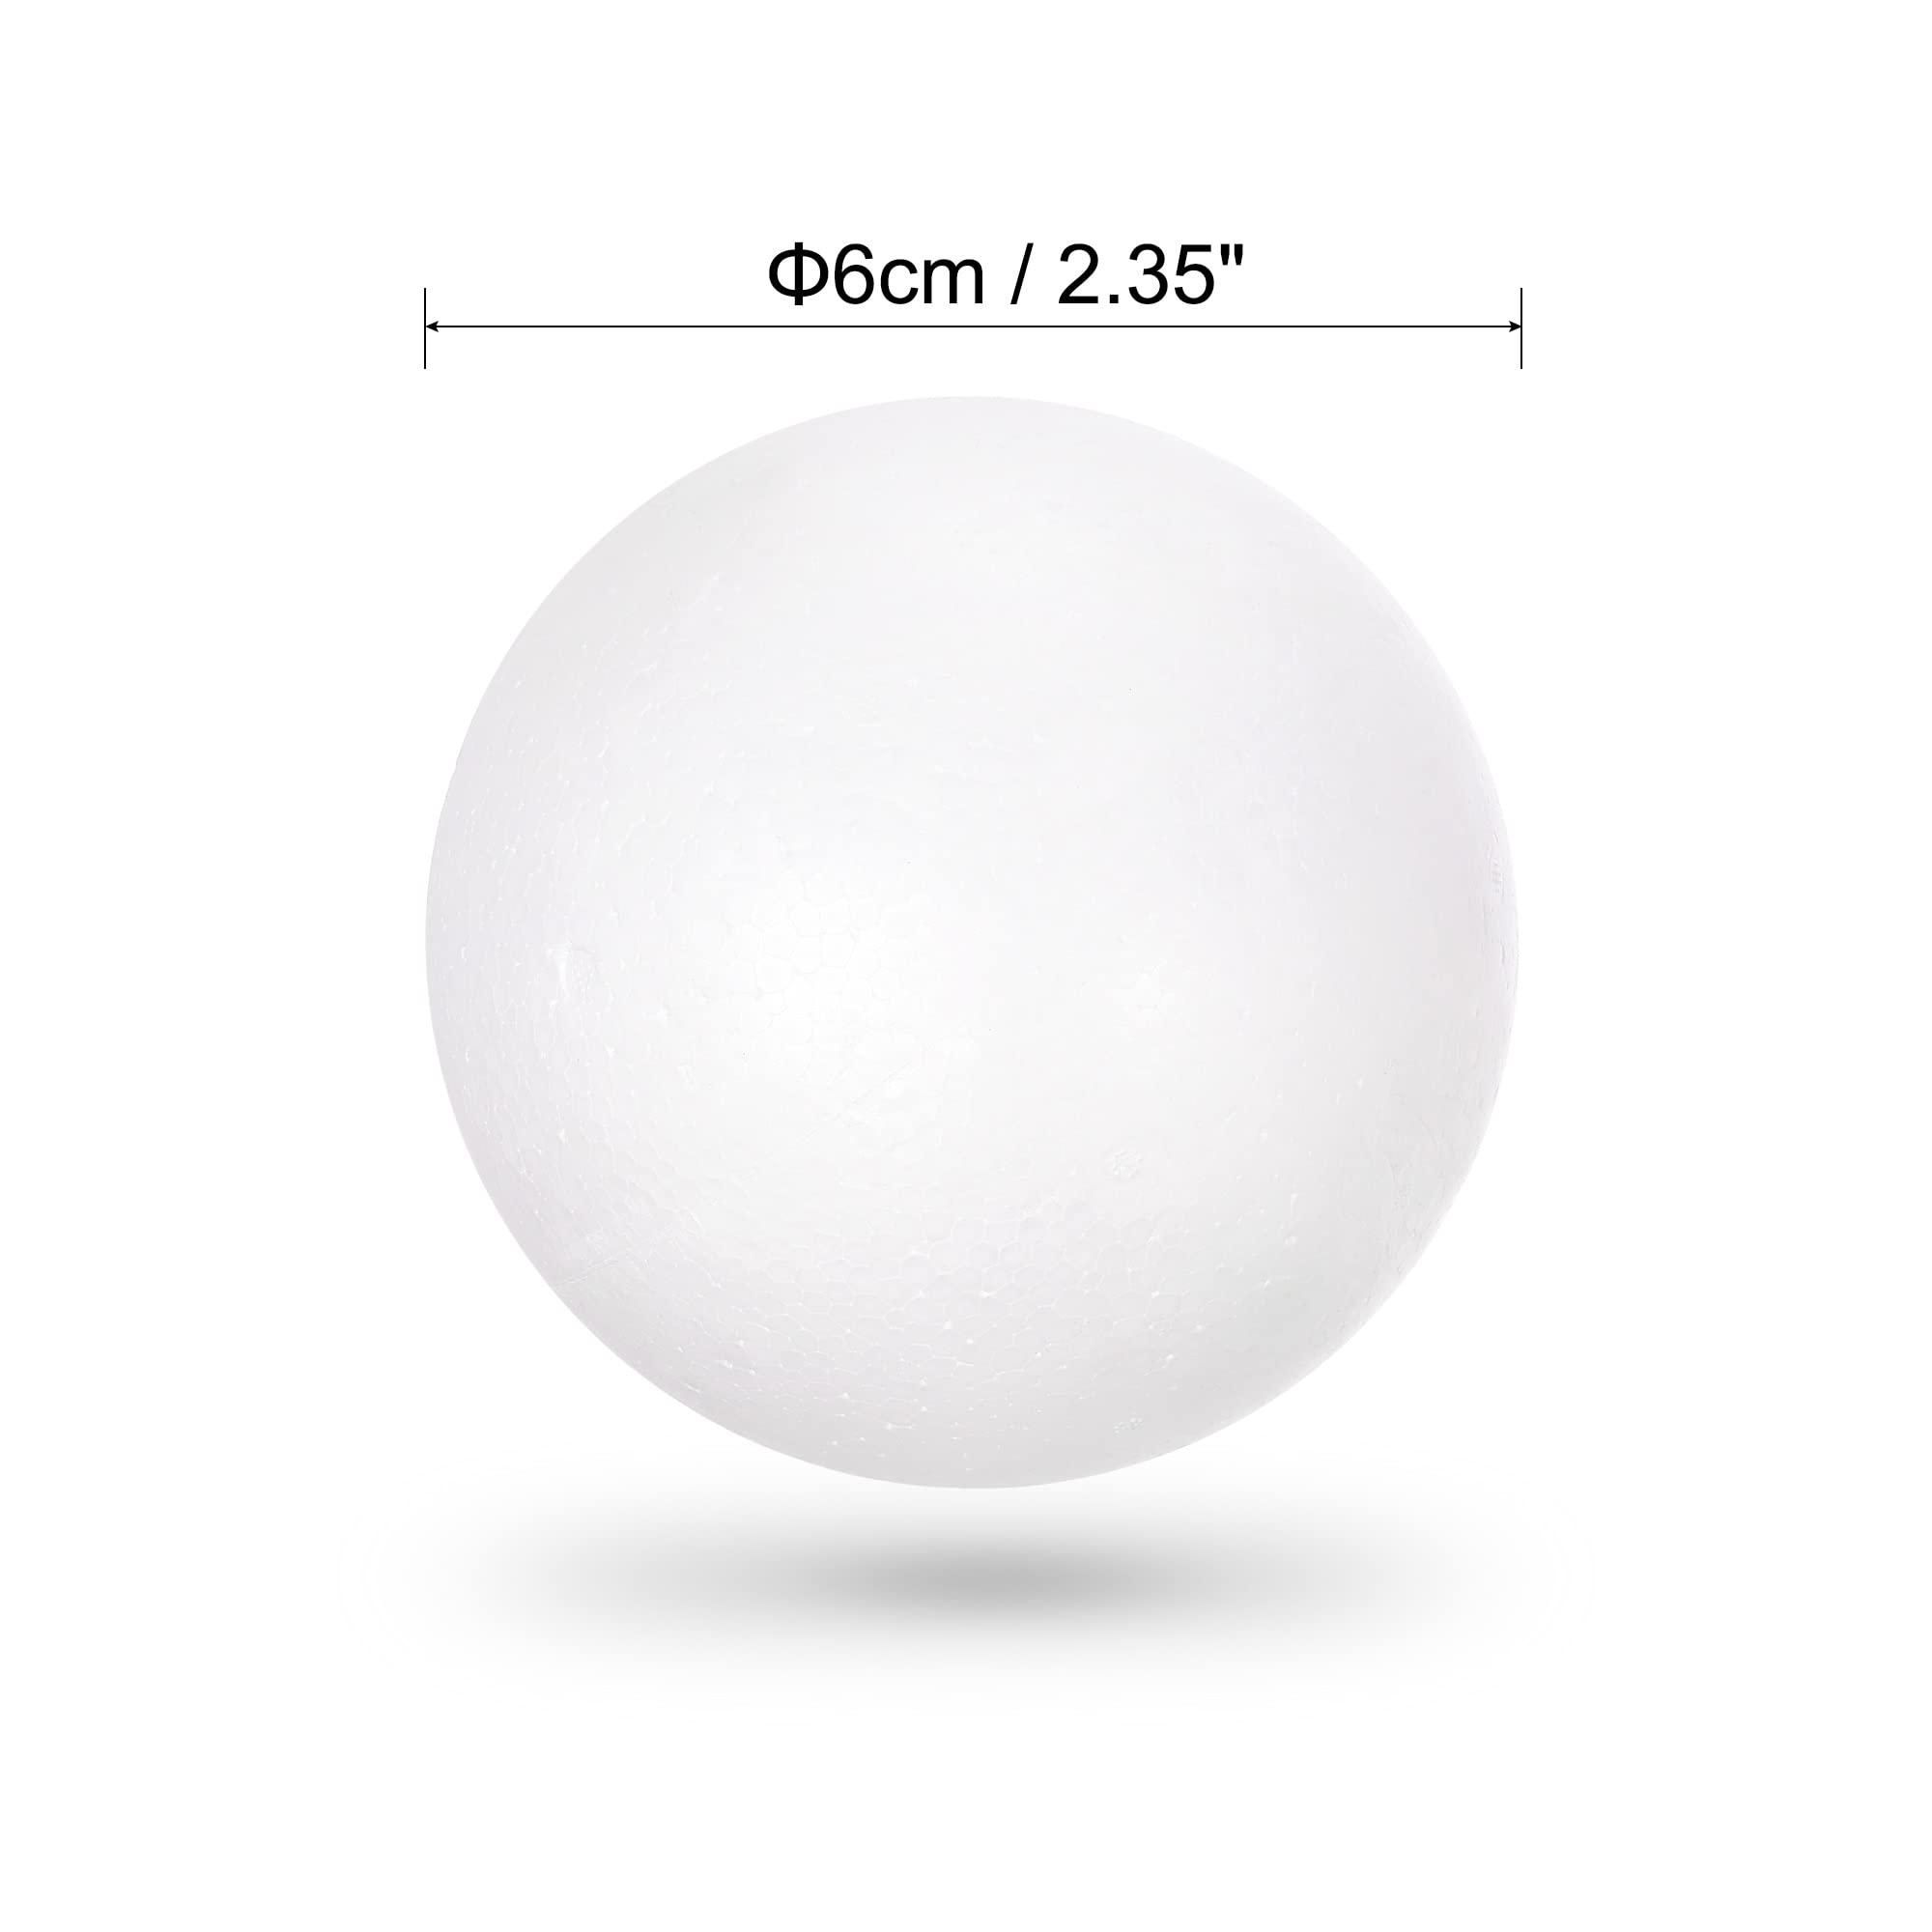 sourcing map 18Pcs 2.35" White Polystyrene Foam Balls Smooth Round Solid Ball for Crafts, Art, DIY, Household, Party Decorations 2